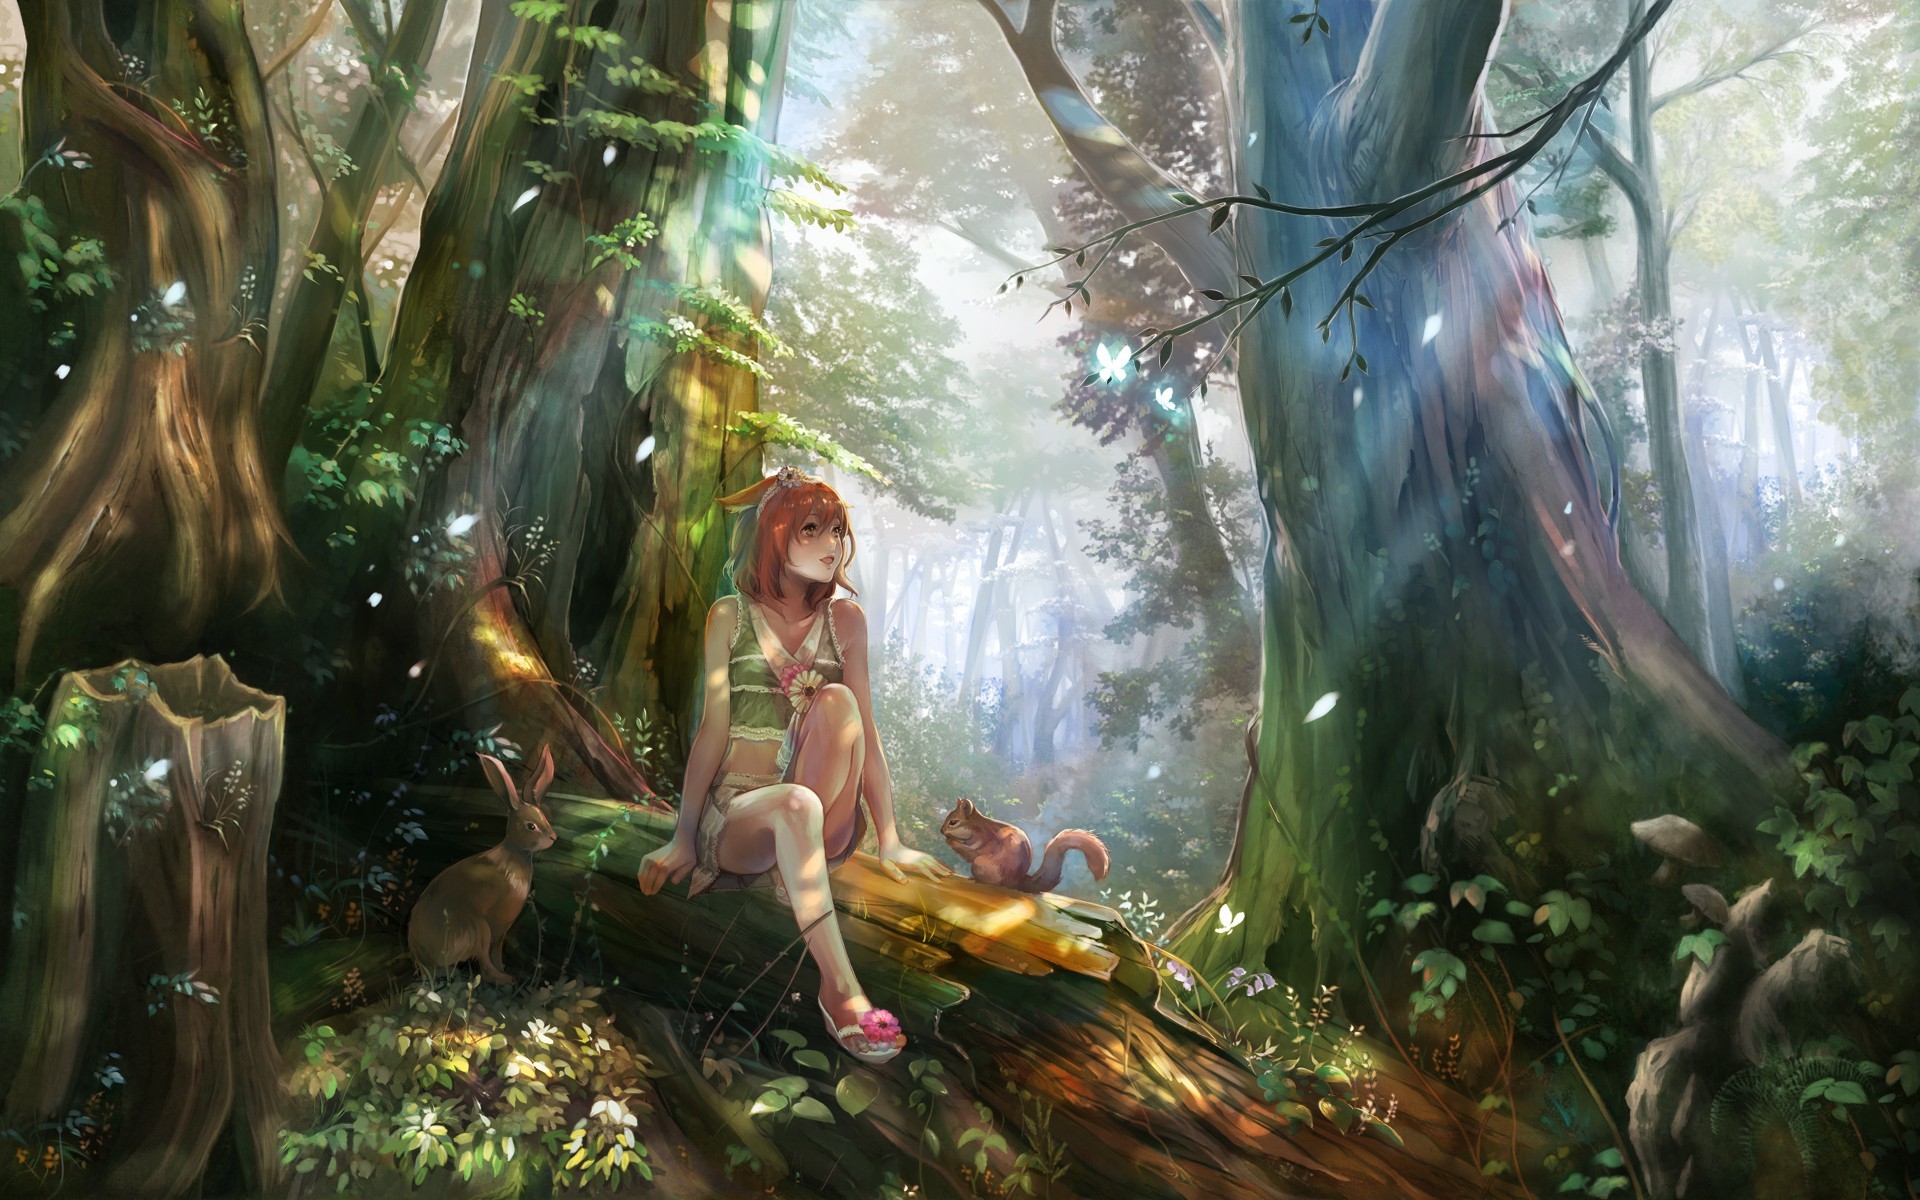 anime Girls, Forest, Nature, Fantasy Art, Forest Clearing, Elves, Redhead, Original Characters 